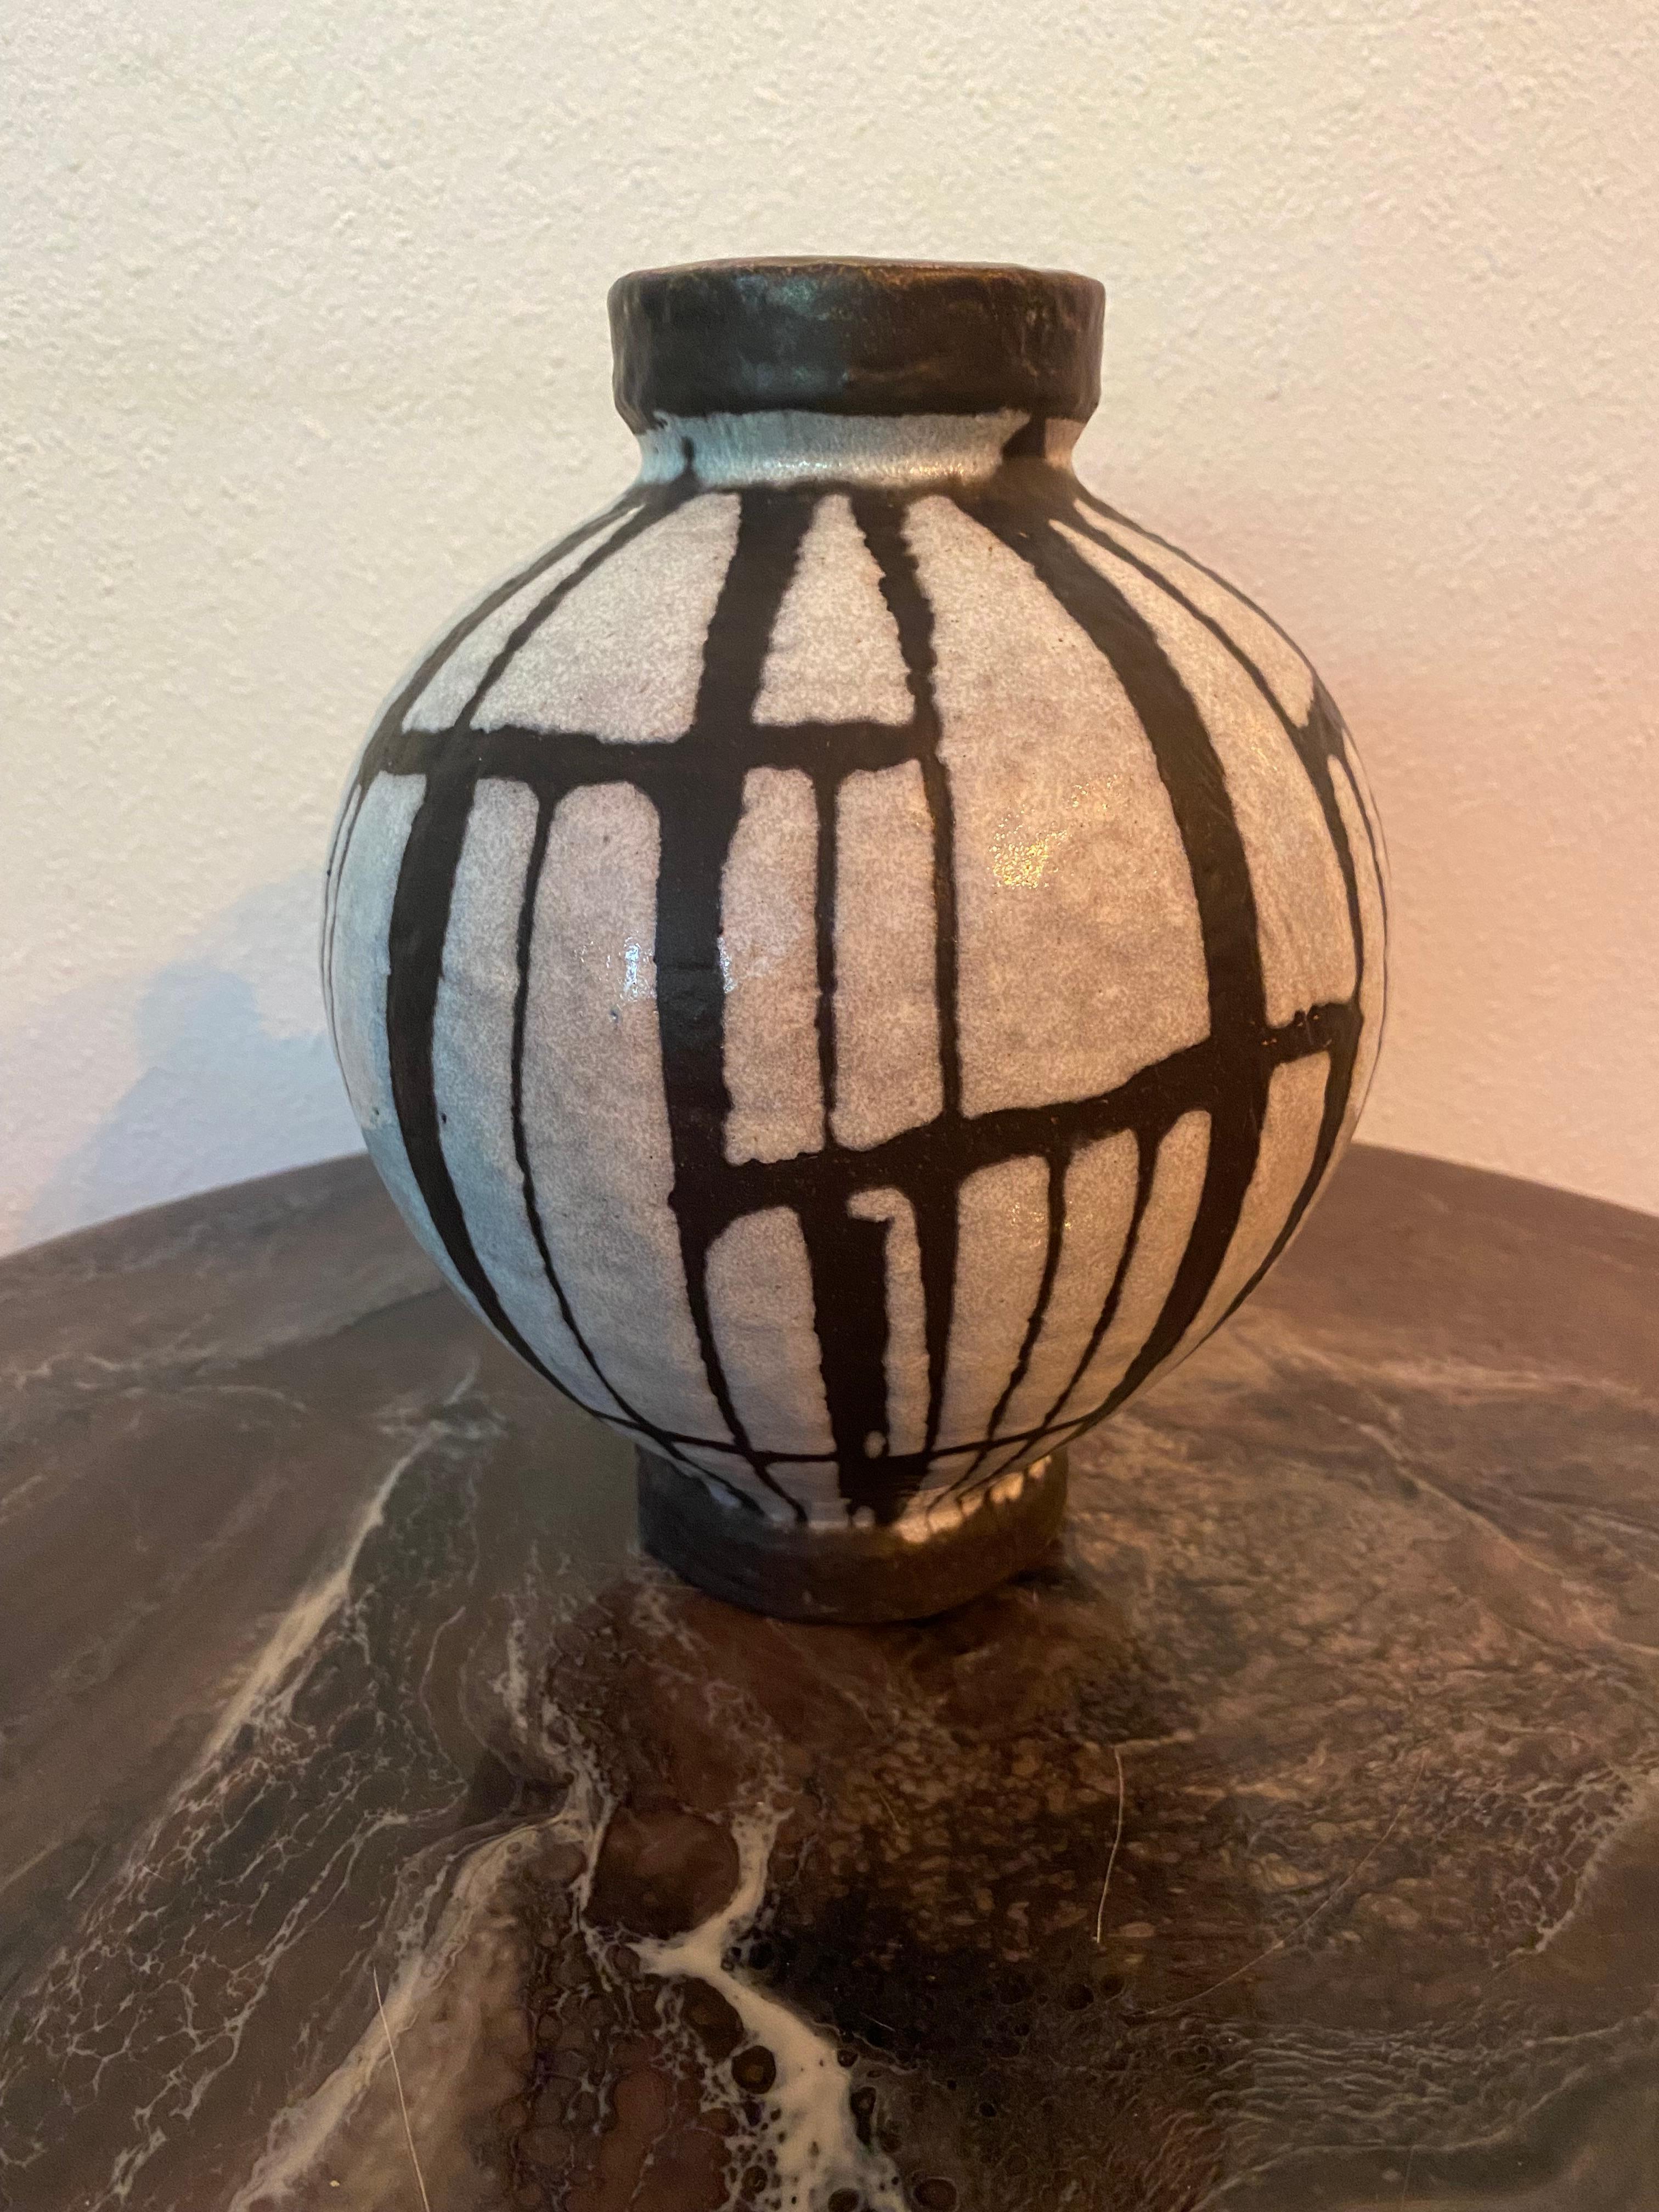 Beautiful rare vase from Carstens Tönnieshof in Germany. Designed by Heinz Siery. The artist Heinz Siery was one of the most important
personalities in the field of ceramics design in the 1950s and 1960s. His design forms significantly shaped the